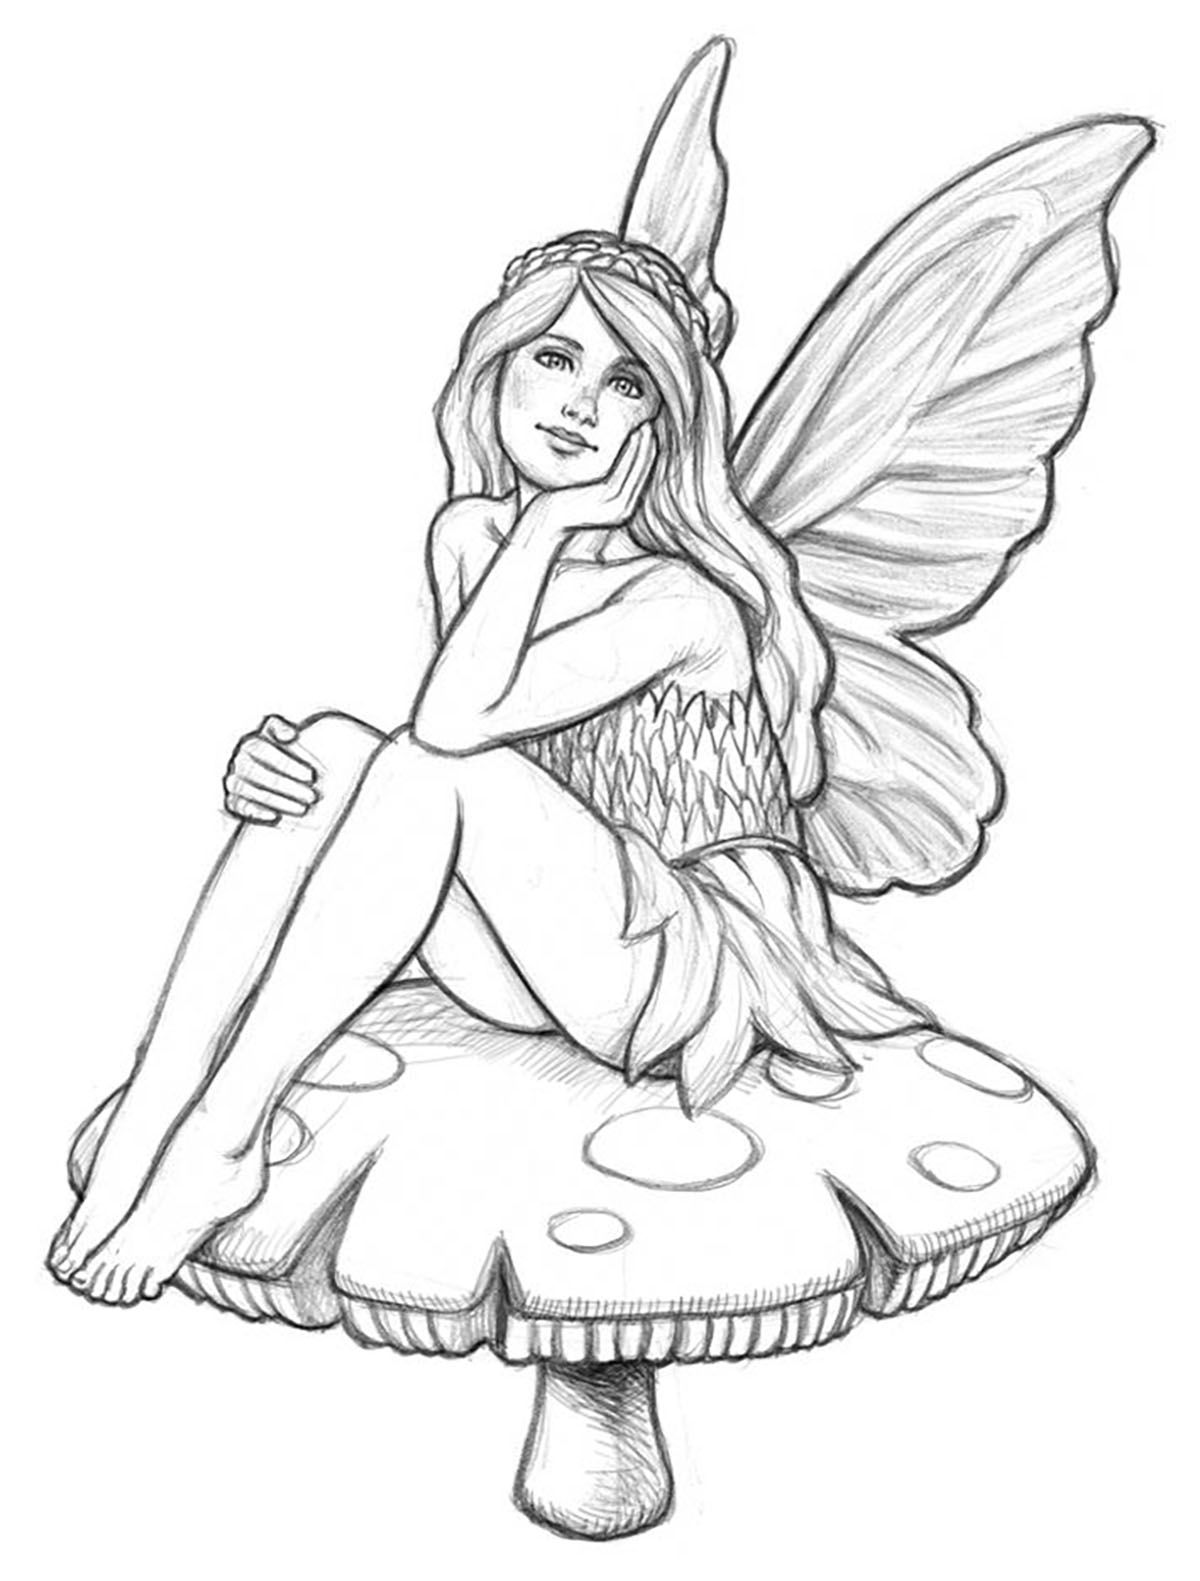 Fairy in her dreams   Myths & legends Adult Coloring Pages